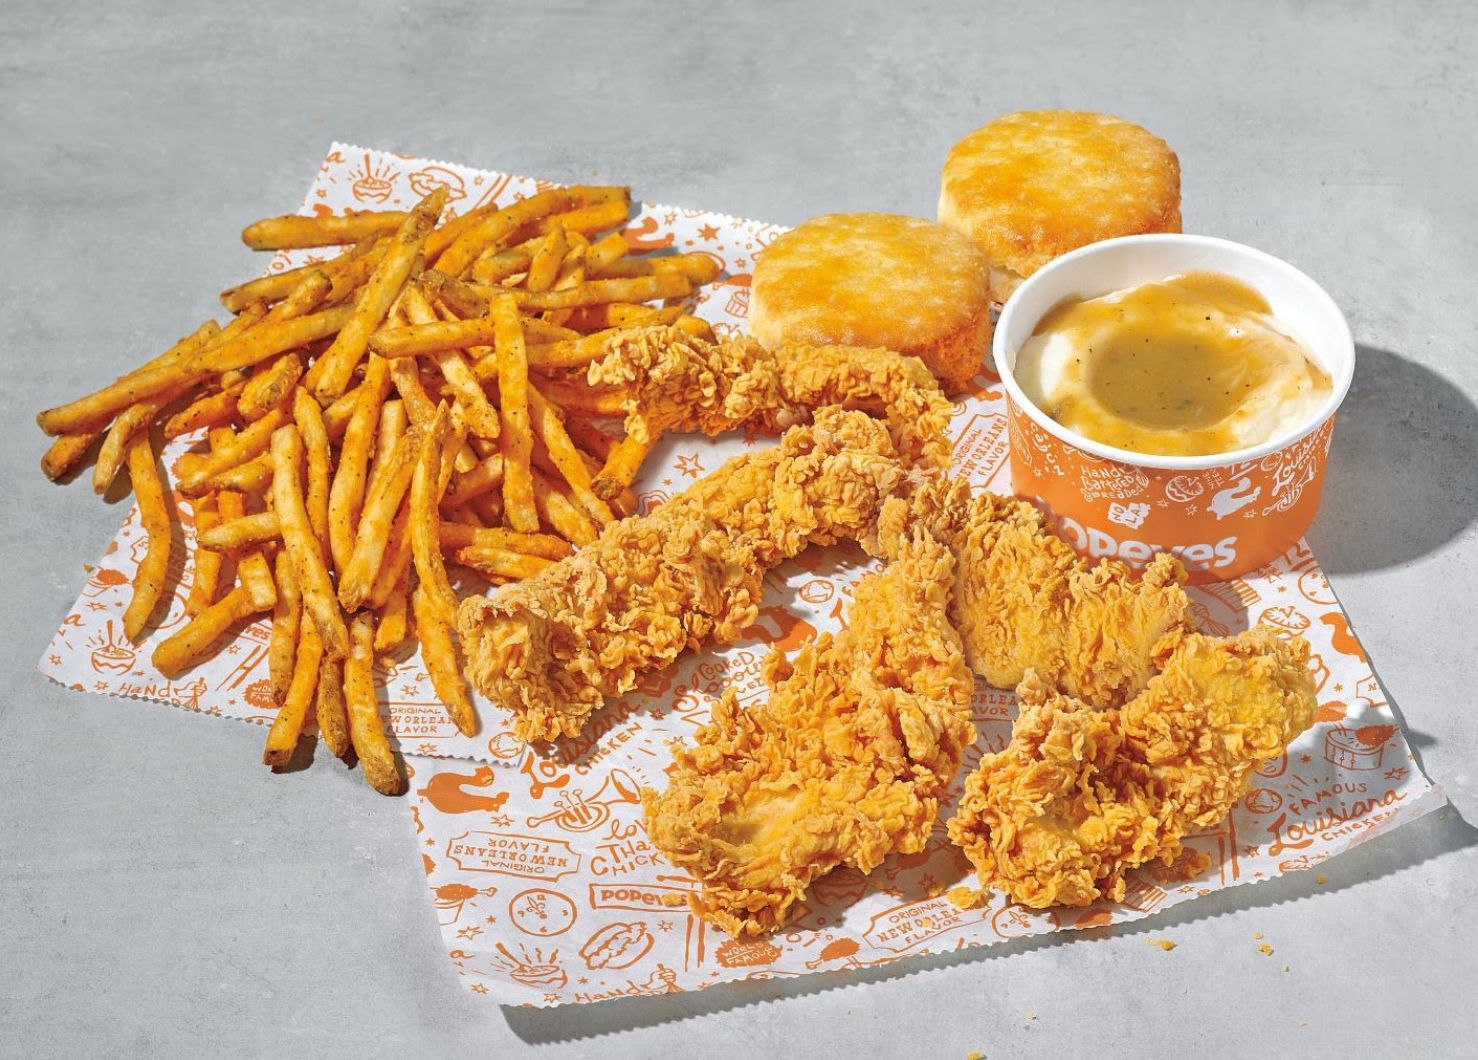 New $12 Tenders 2 Can Dine Meal Arrives at Popeyes for a Limited Time